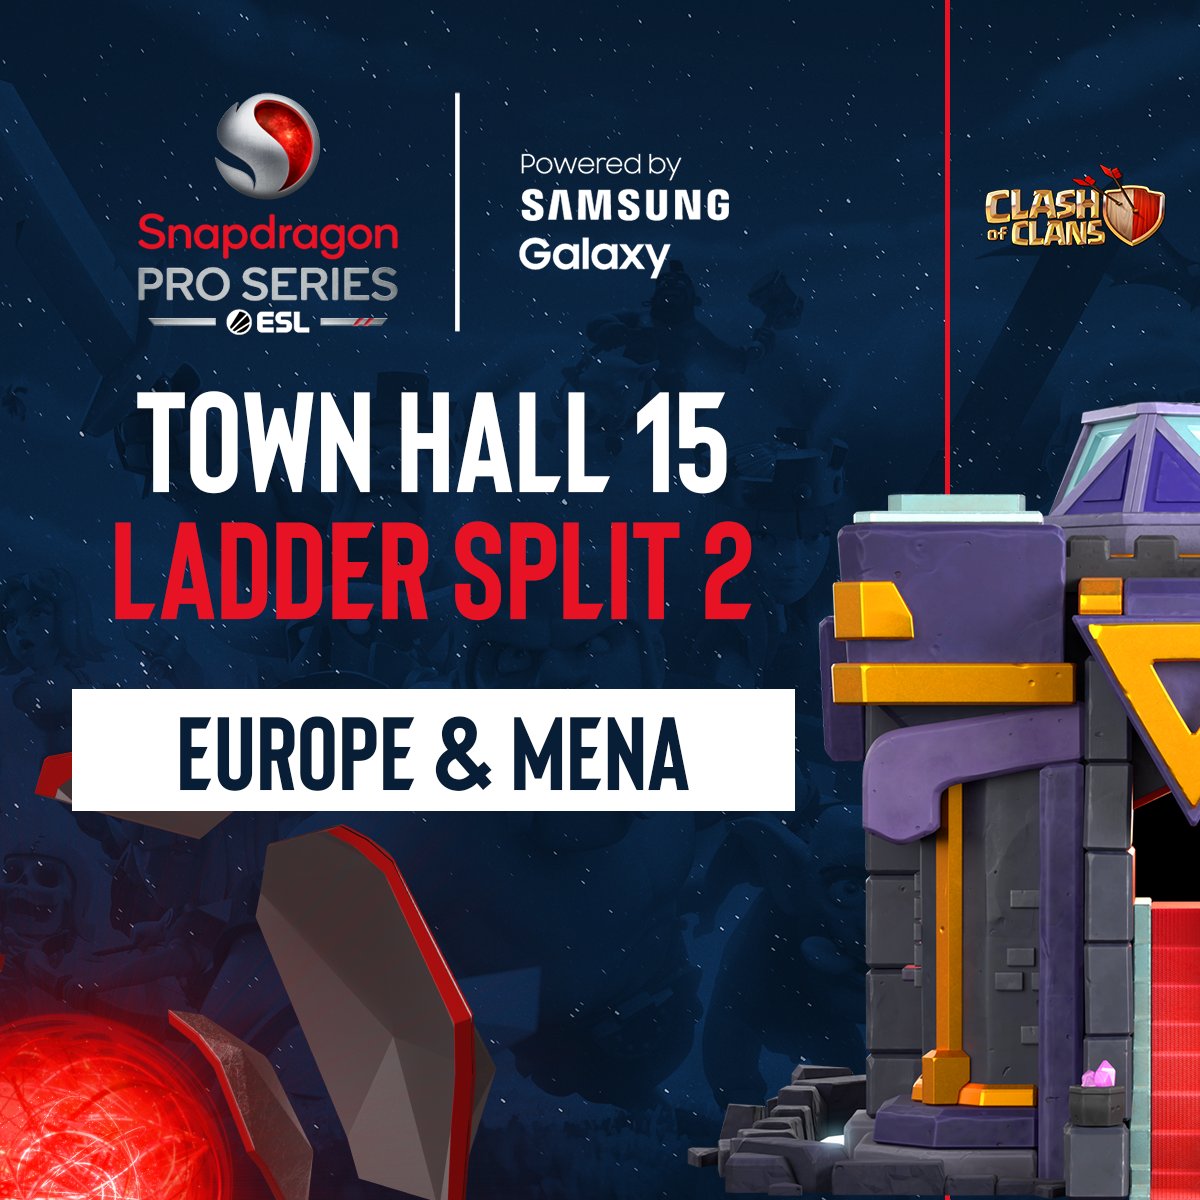 📣 Split 1 may not be done yet, but SMO Split 2 is already closing in! Sign up and face off against the EUR & MENA's top teams for a share of a $7,500 prize pool! 💰 🔗 play.eslgaming.com/clashofclans/g… #SnapdragonProSeries @CoCEsports